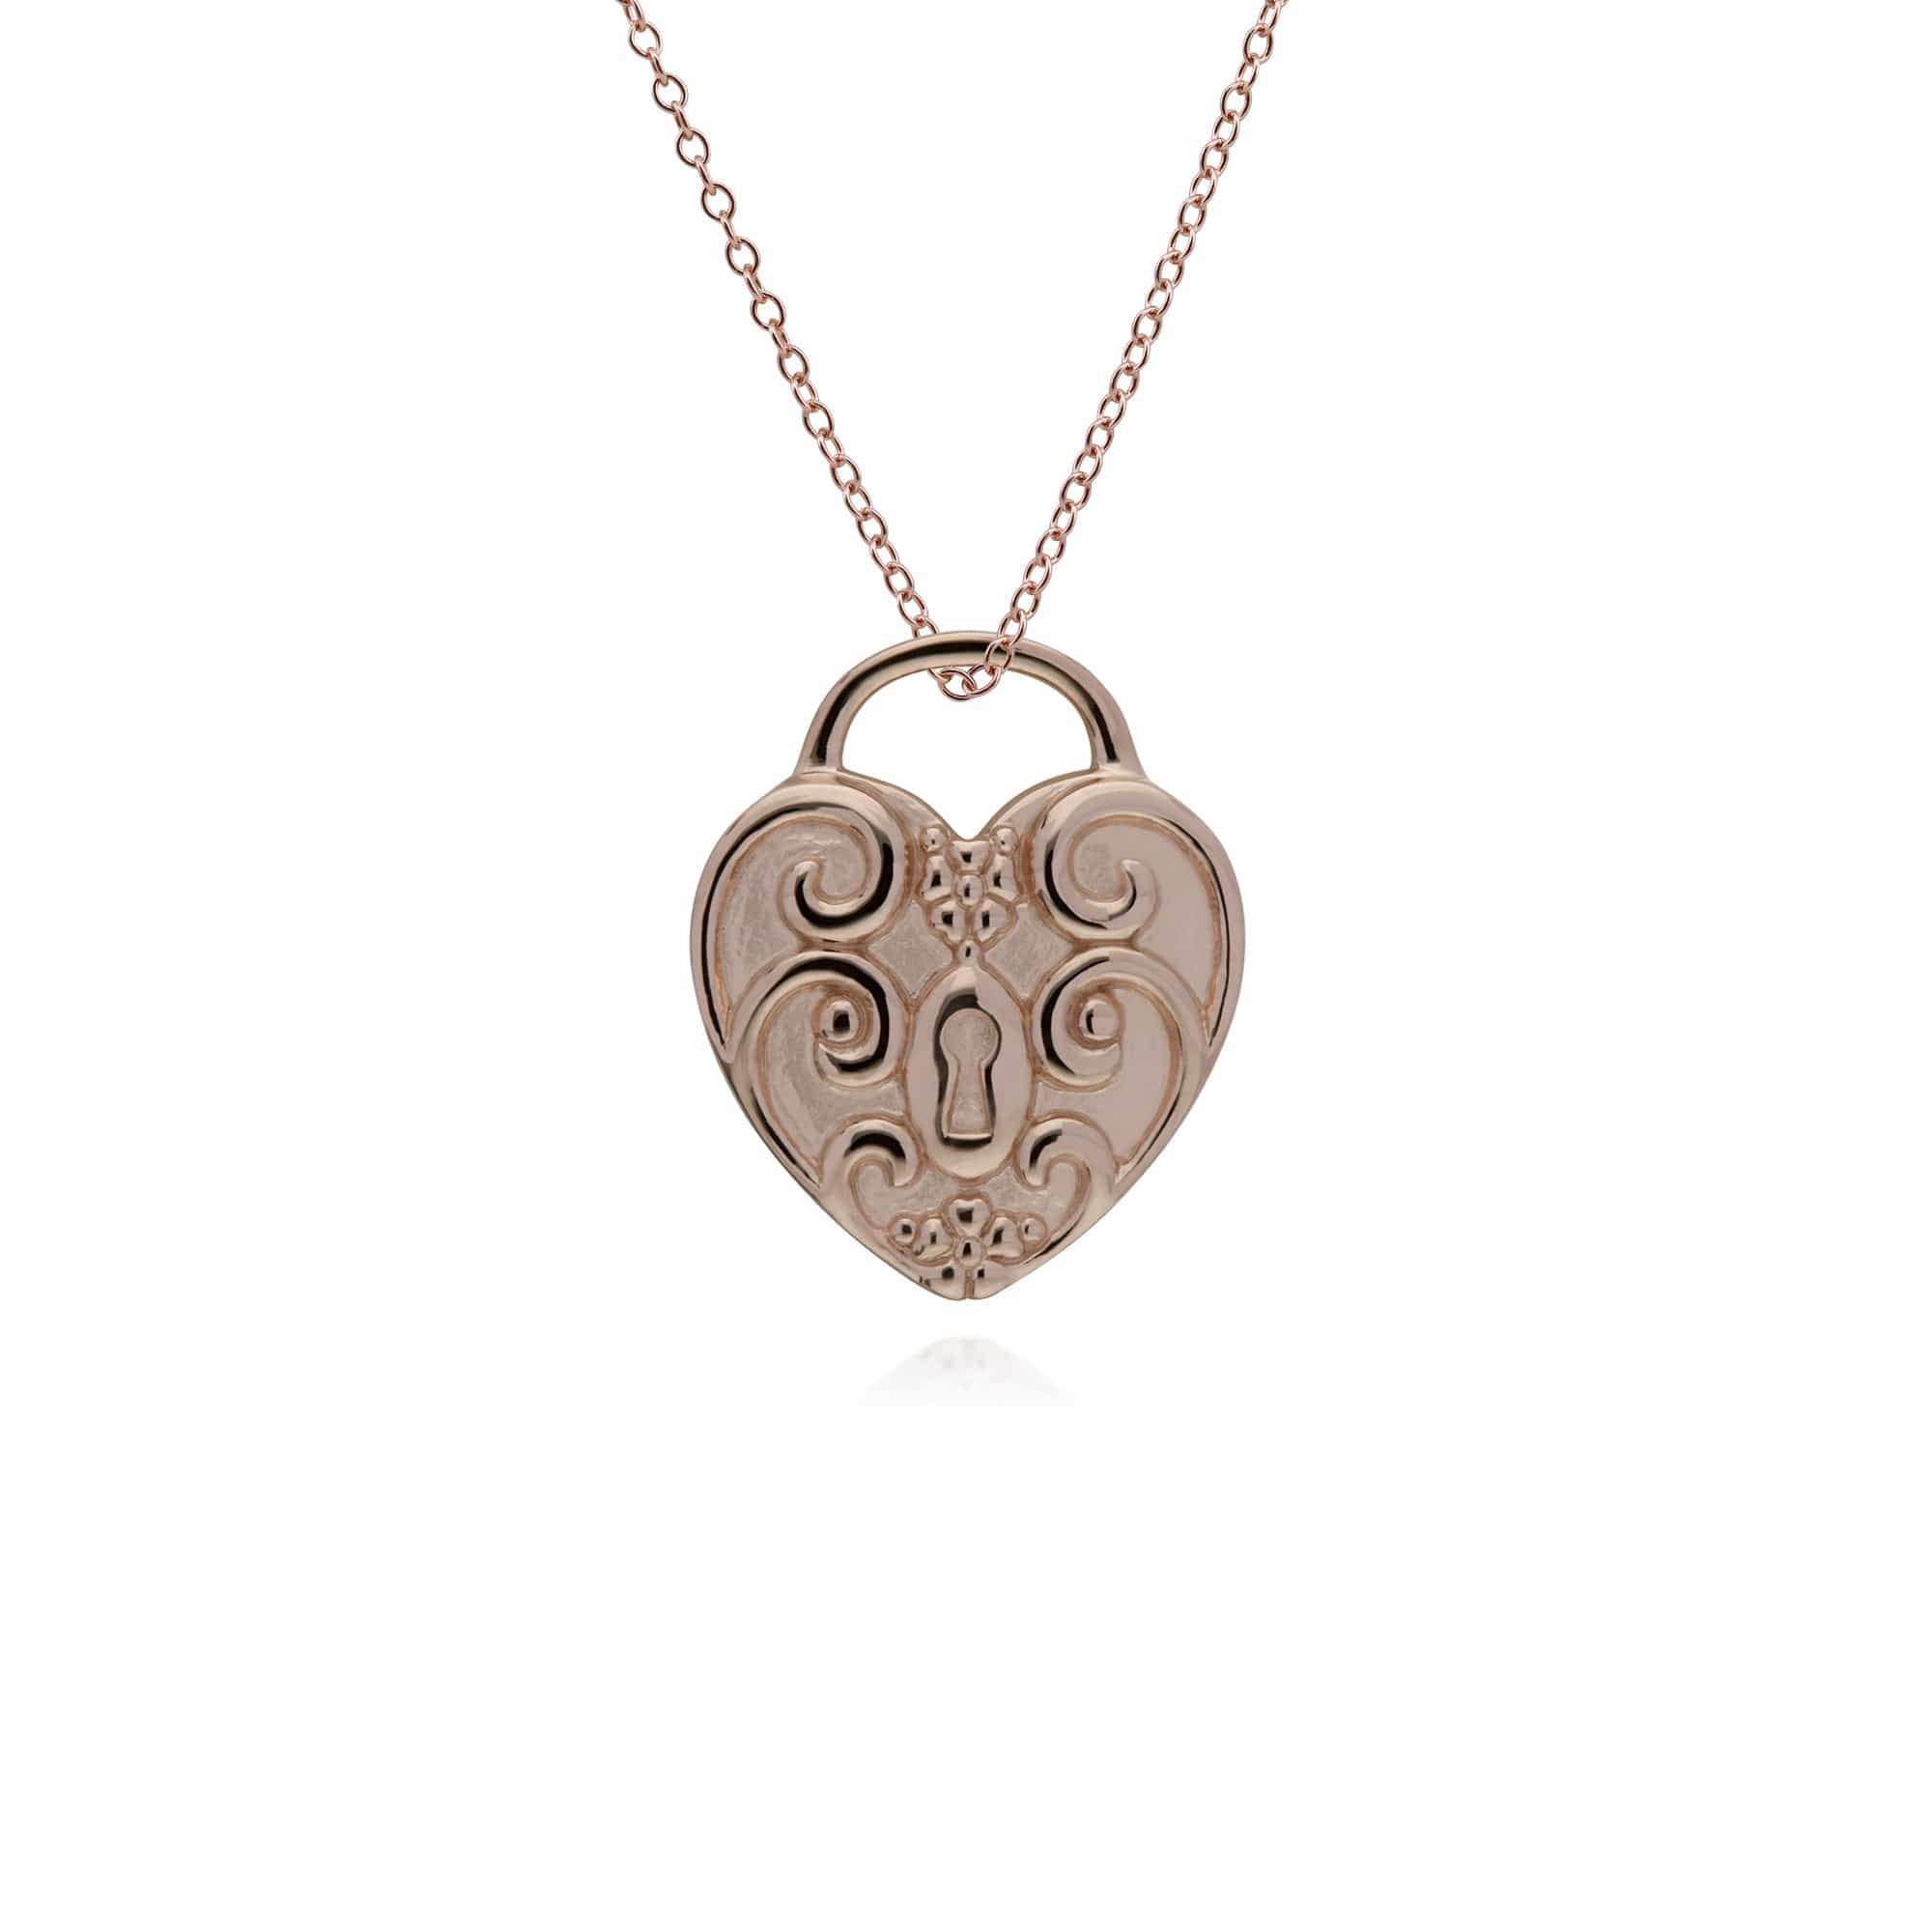 270P026708925-270P026501925 Classic Swirl Heart Lock Pendant & Peridot Big Key Charm in Rose Gold Plated 925 Sterling Silver 3